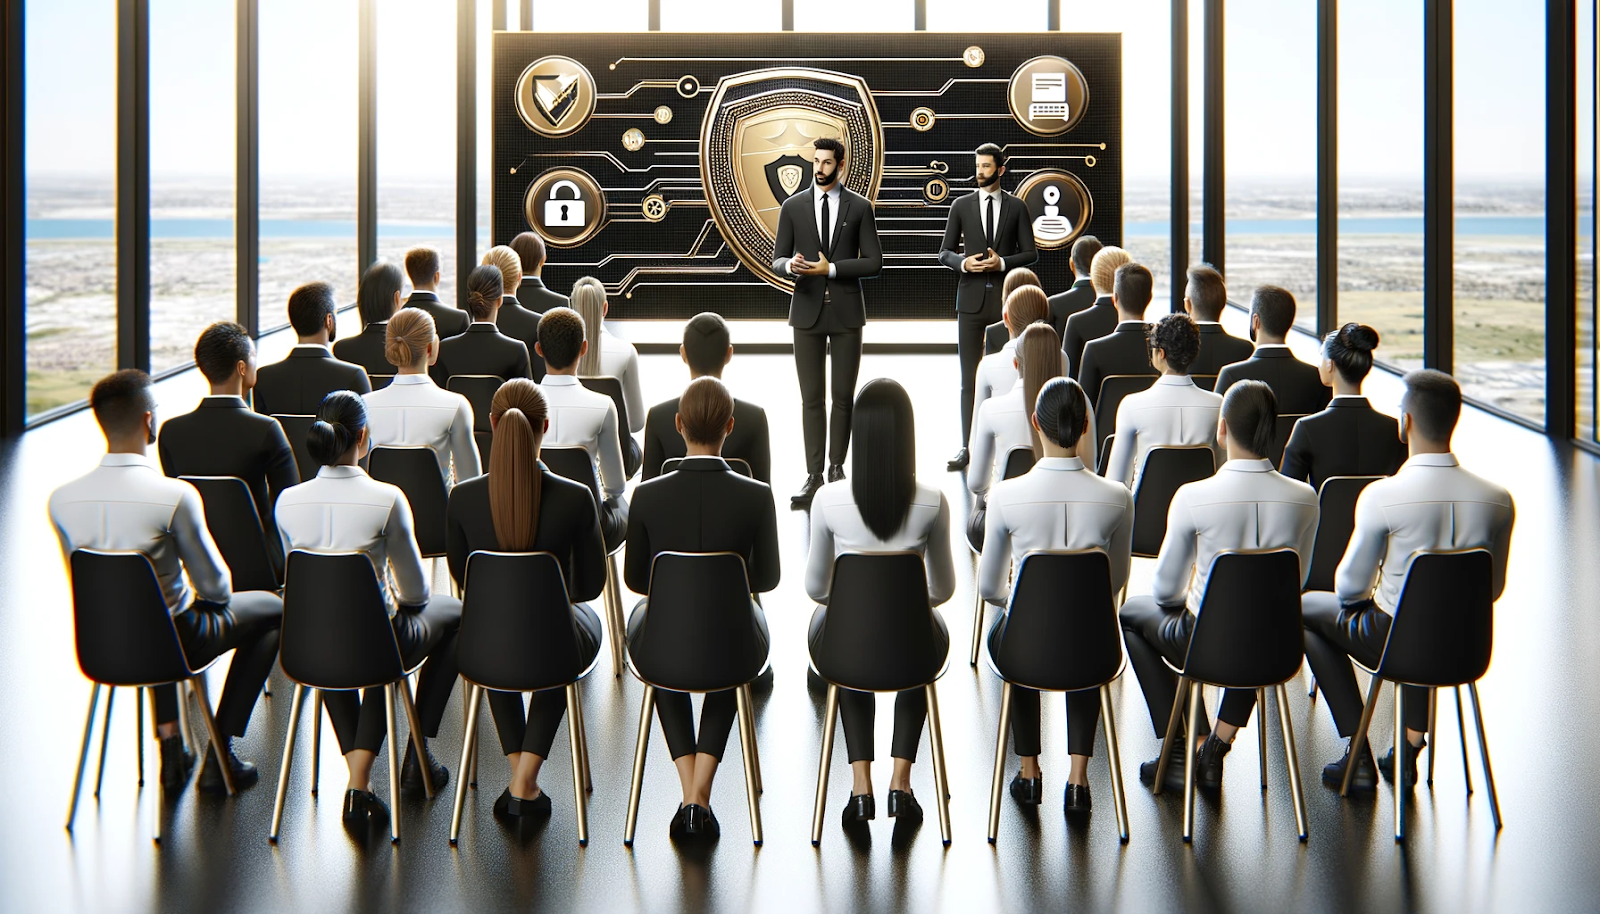 This is a photorealistic image depicting a retail security training session. It features a diverse group of employees attentively listening to a security expert. 